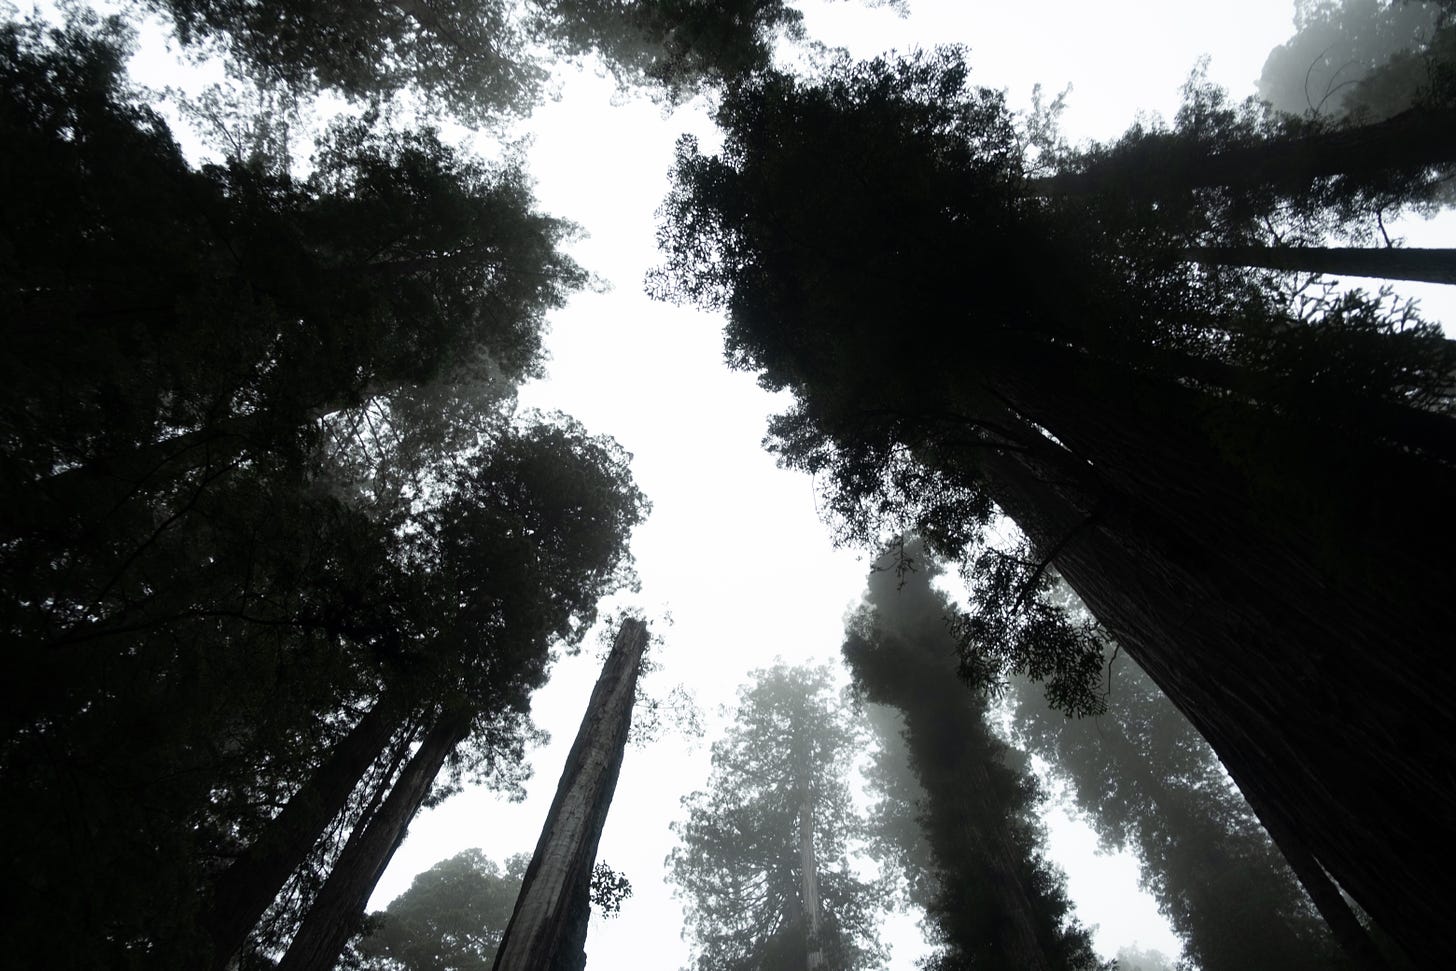 Looking up, tall redwoods stretch toward misty March skies. 